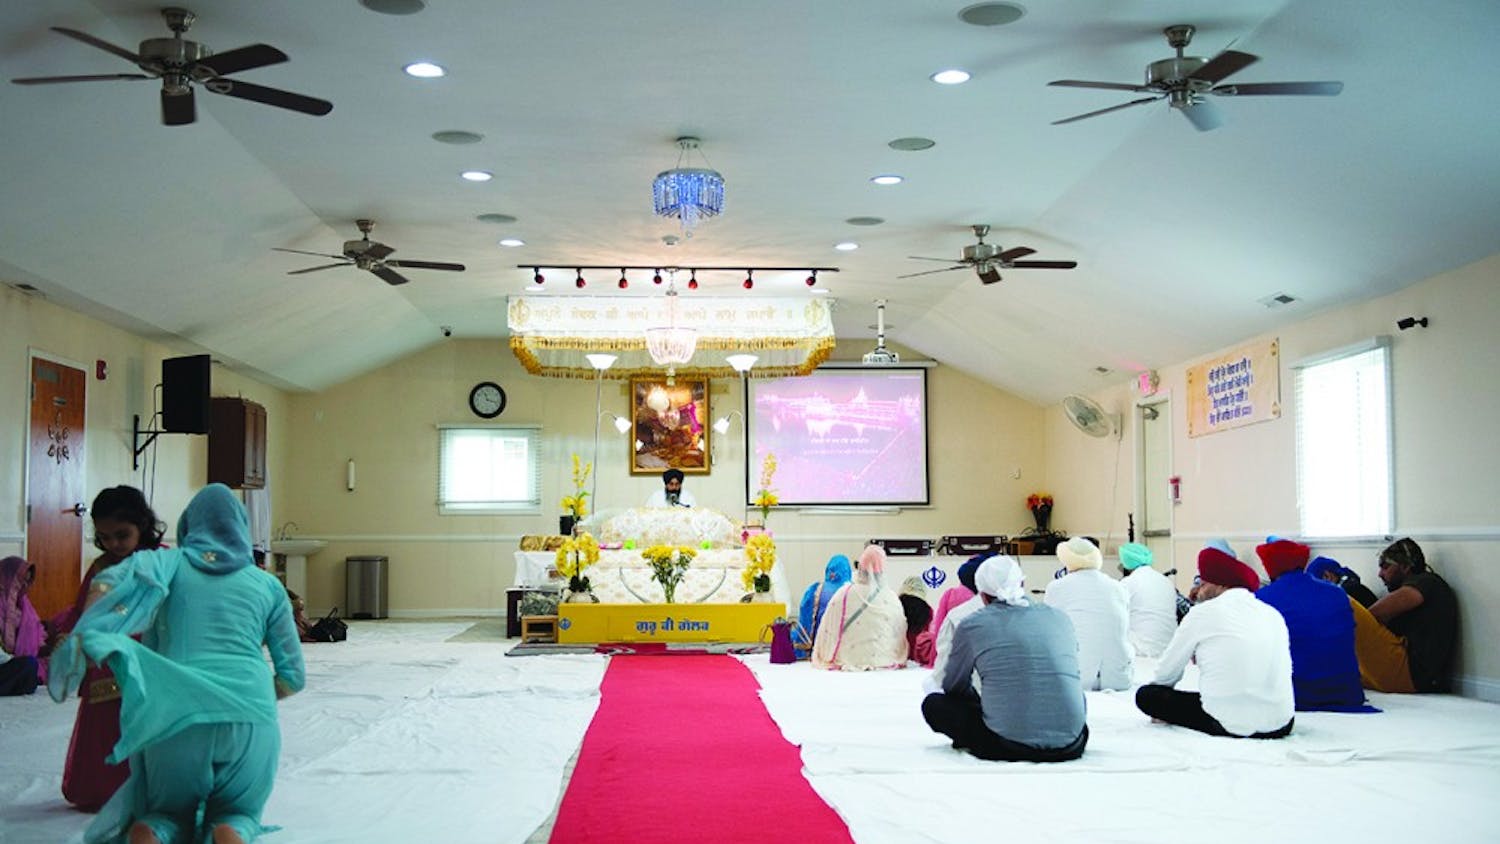 Sikhism practitioners in Fishers, Ind. attending a weekly religious ceremony where words from the Guru Granth Sahib are read. The Holy Book contains passages from the Quran and from the Old Testament. 